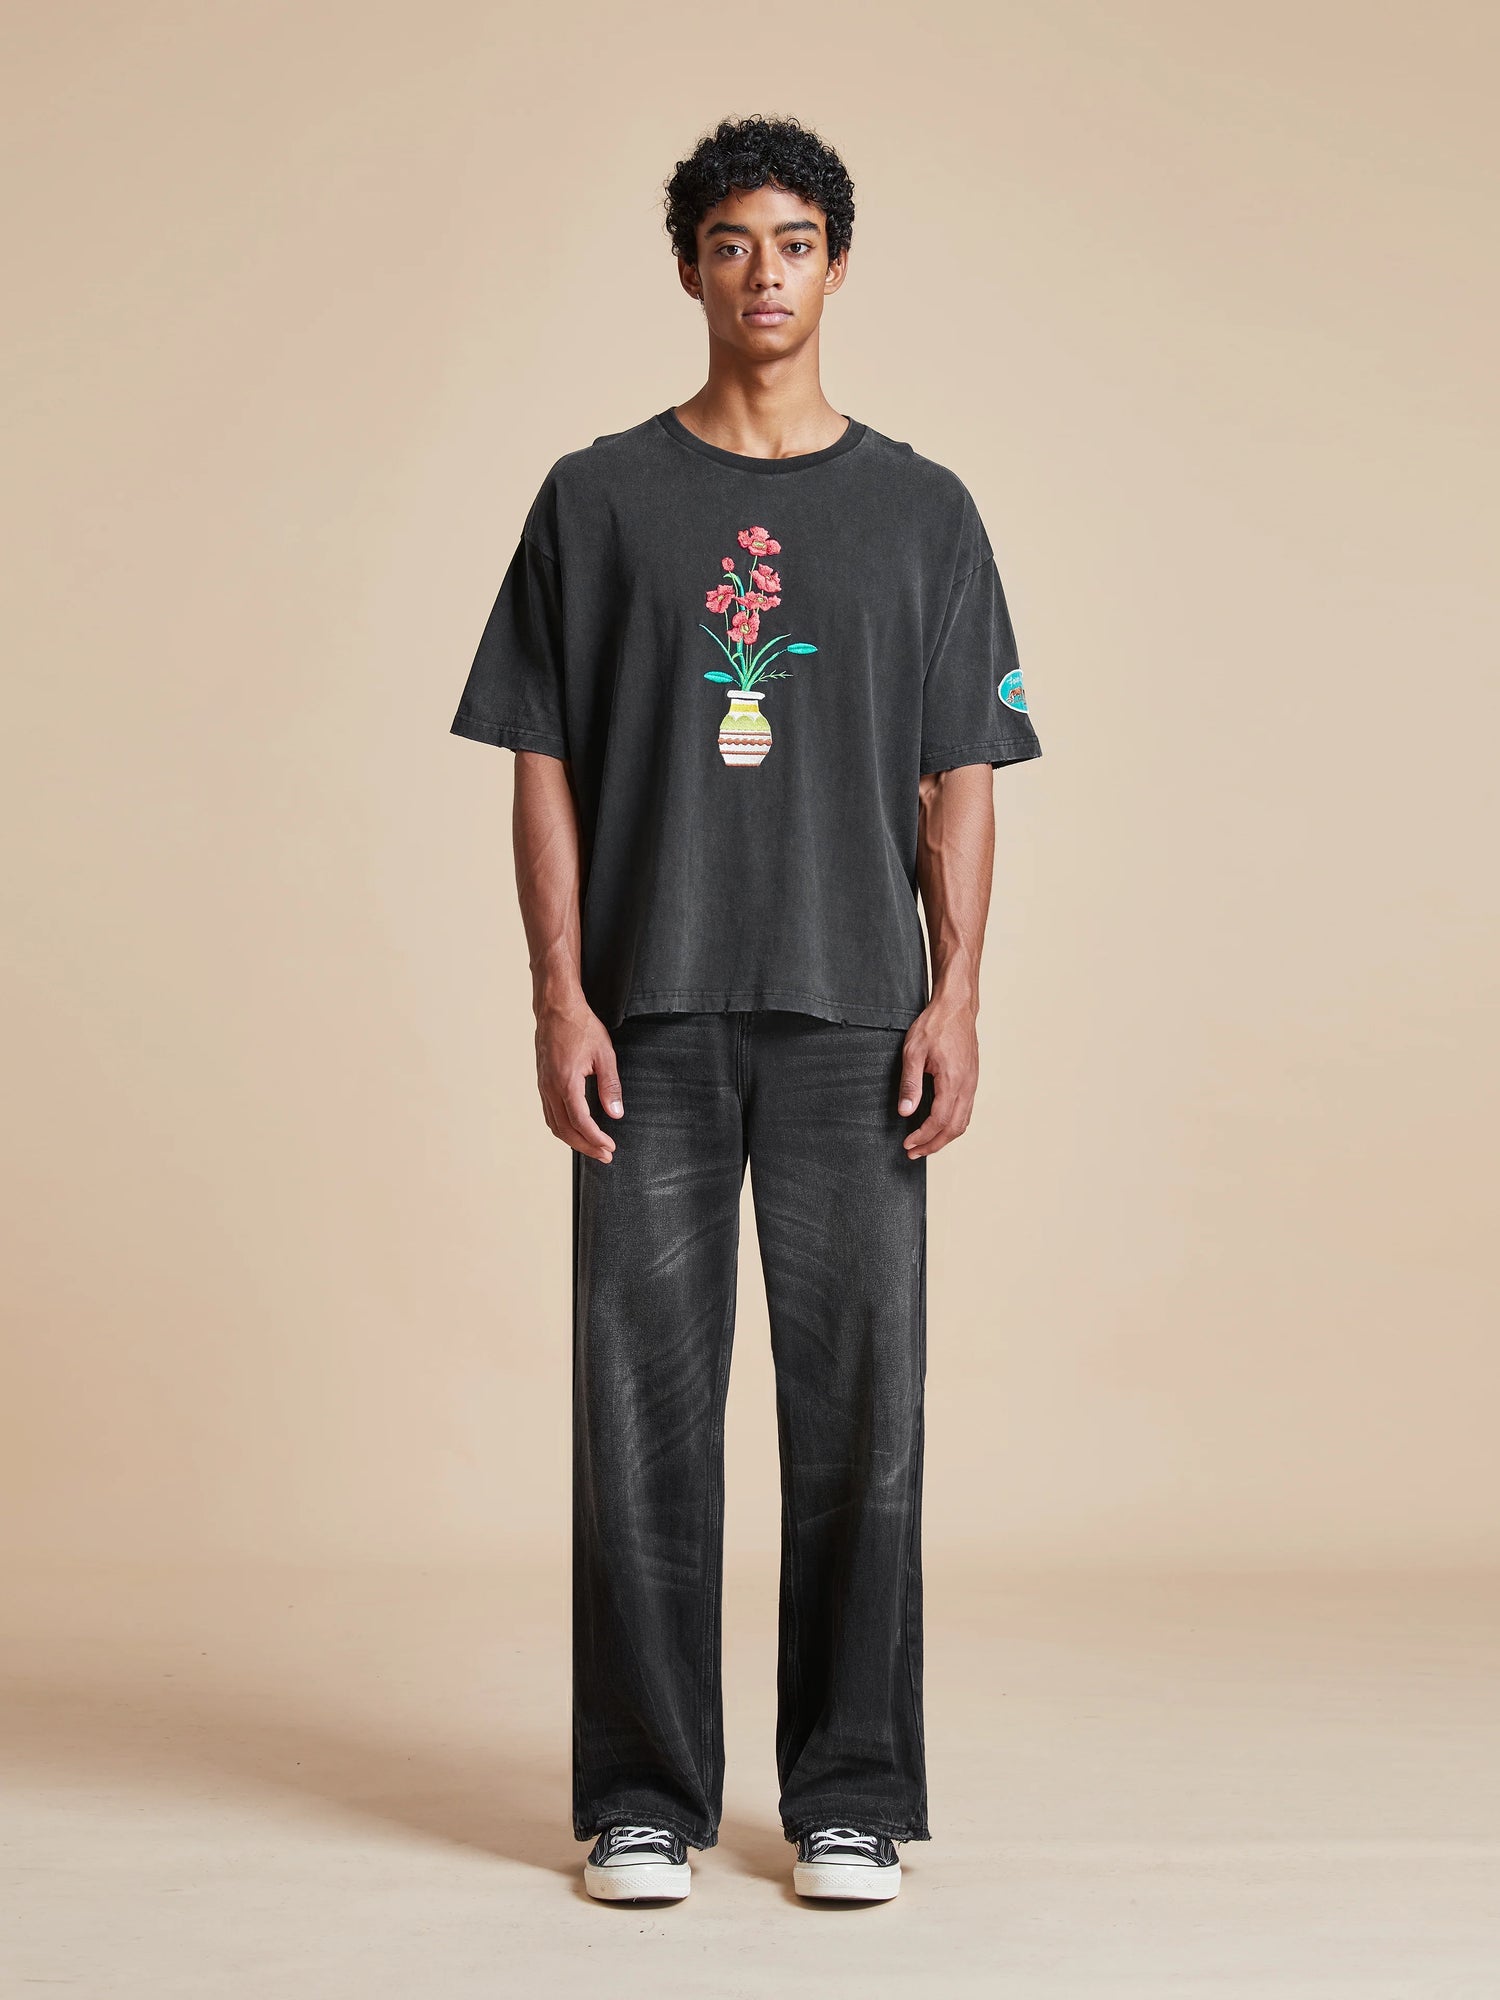 A man wearing a black t-shirt with a Flowers Vase Tee embroidered using Phulkari embroidery by Found.